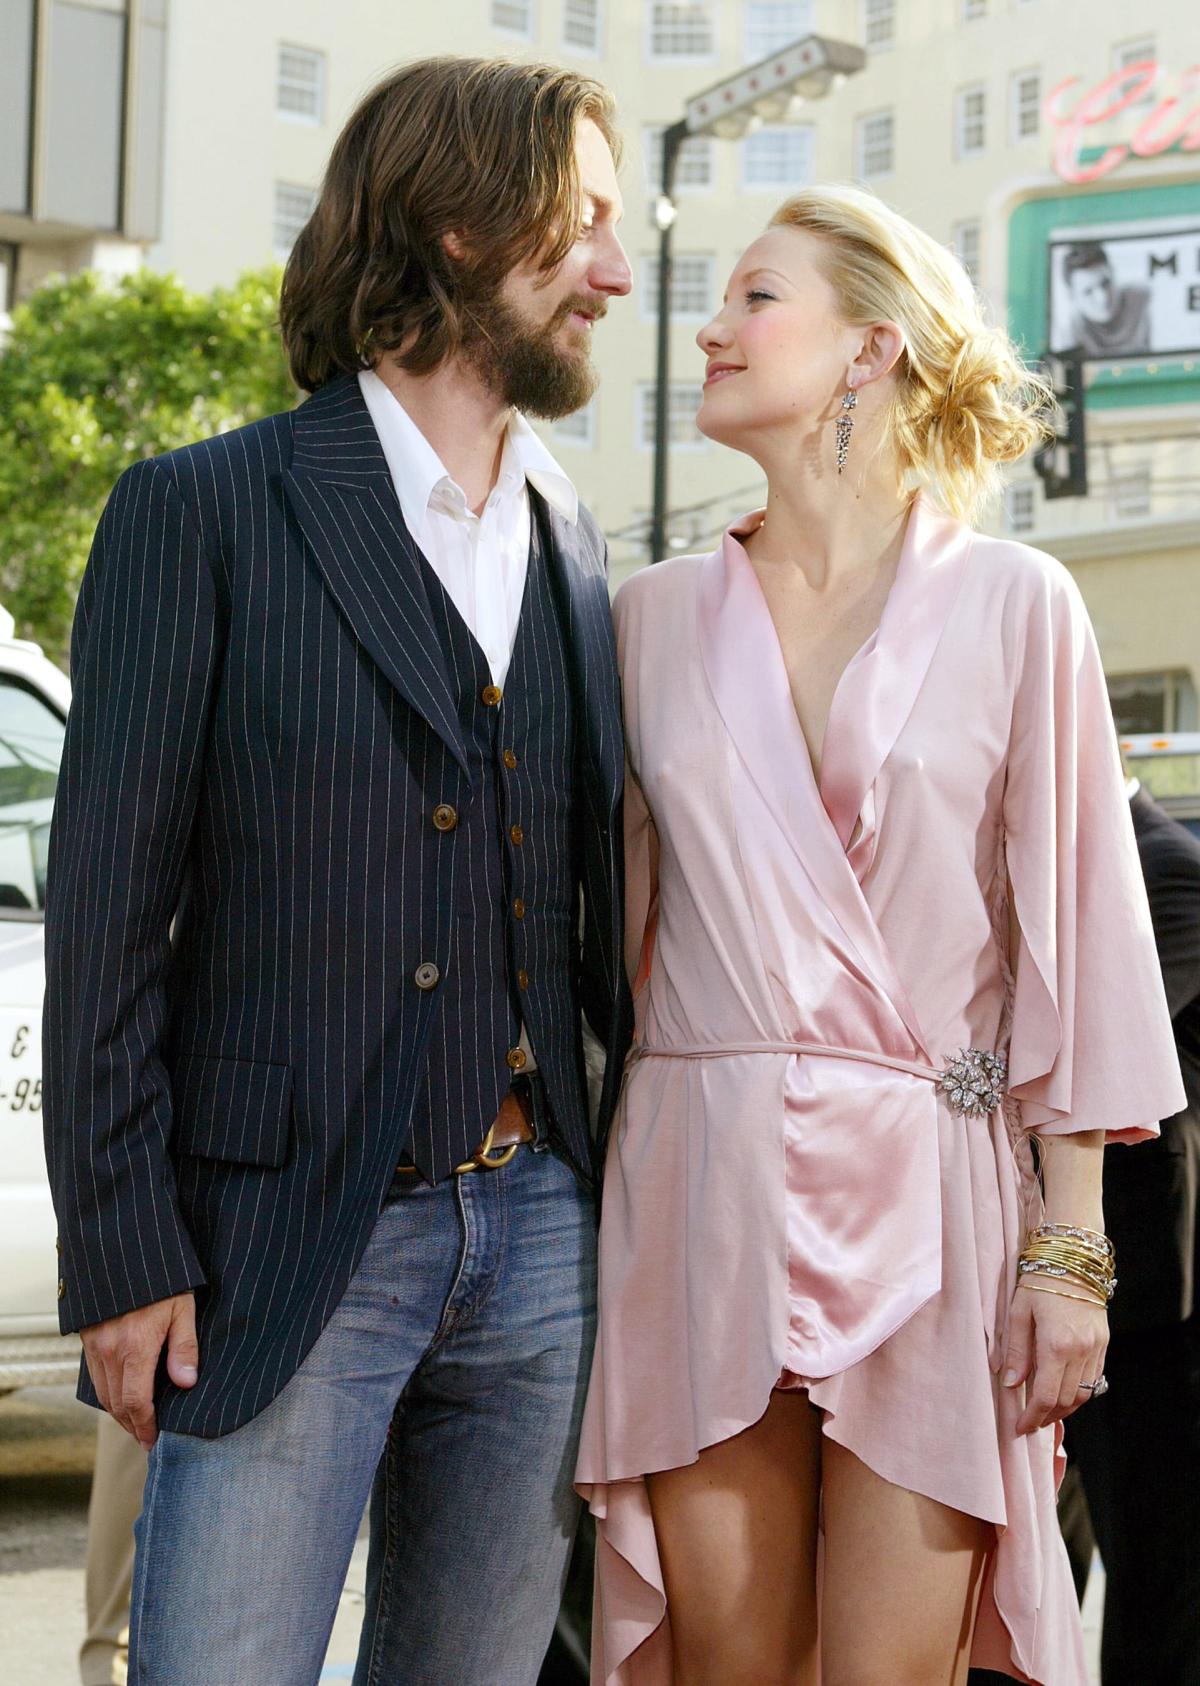 Kate Hudson looks back on her marriage to Chris Robinson at the age of 21: “Not a mistake”